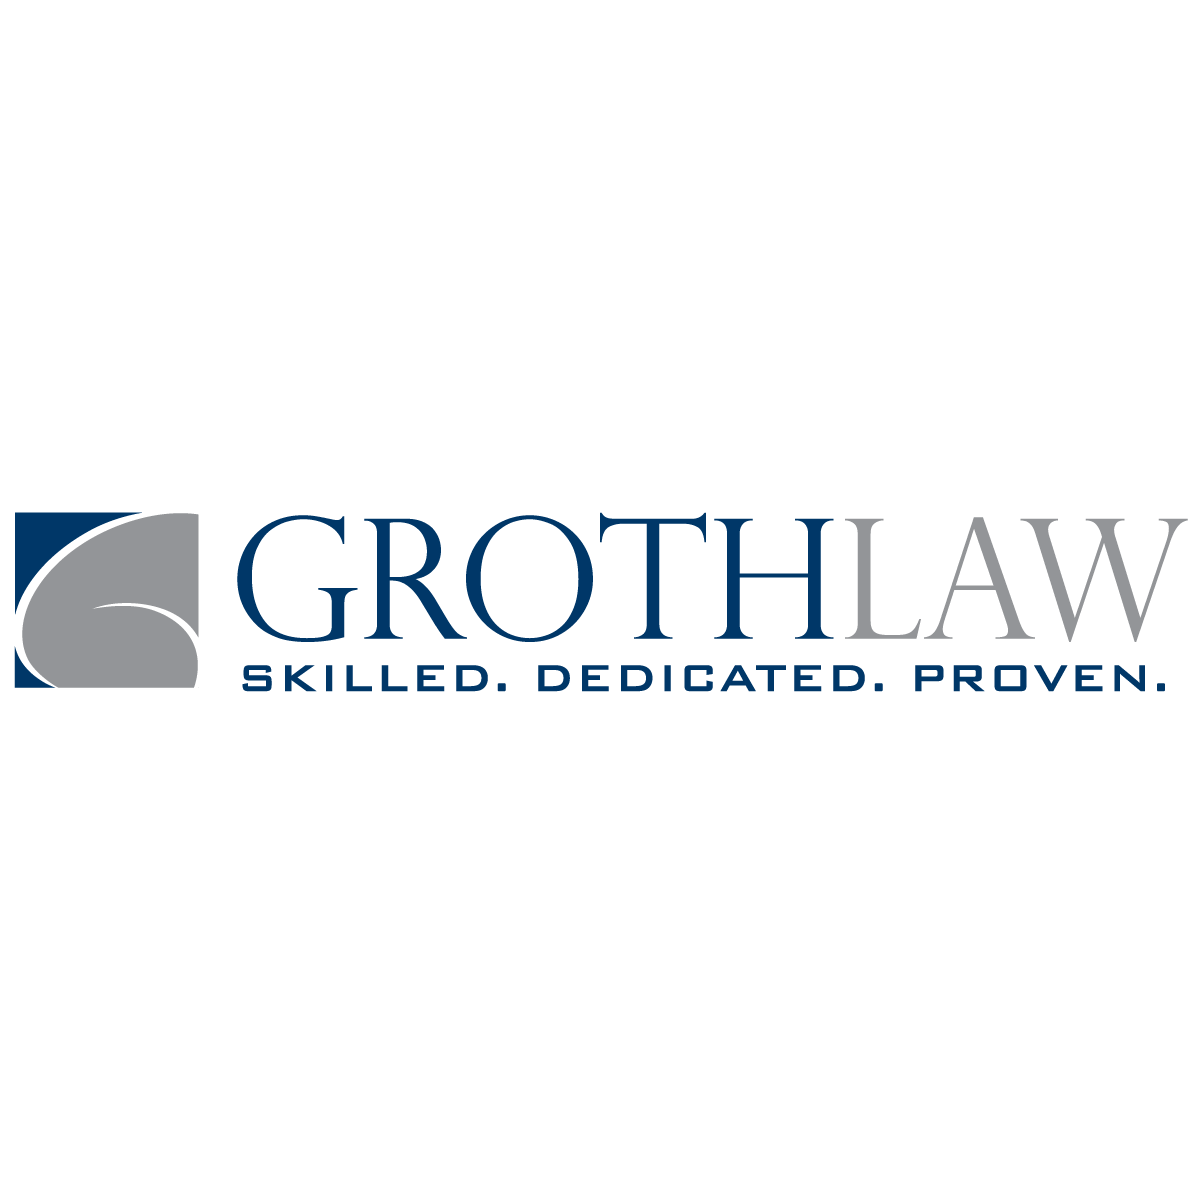 Groth Law Firm, S.C. Logo